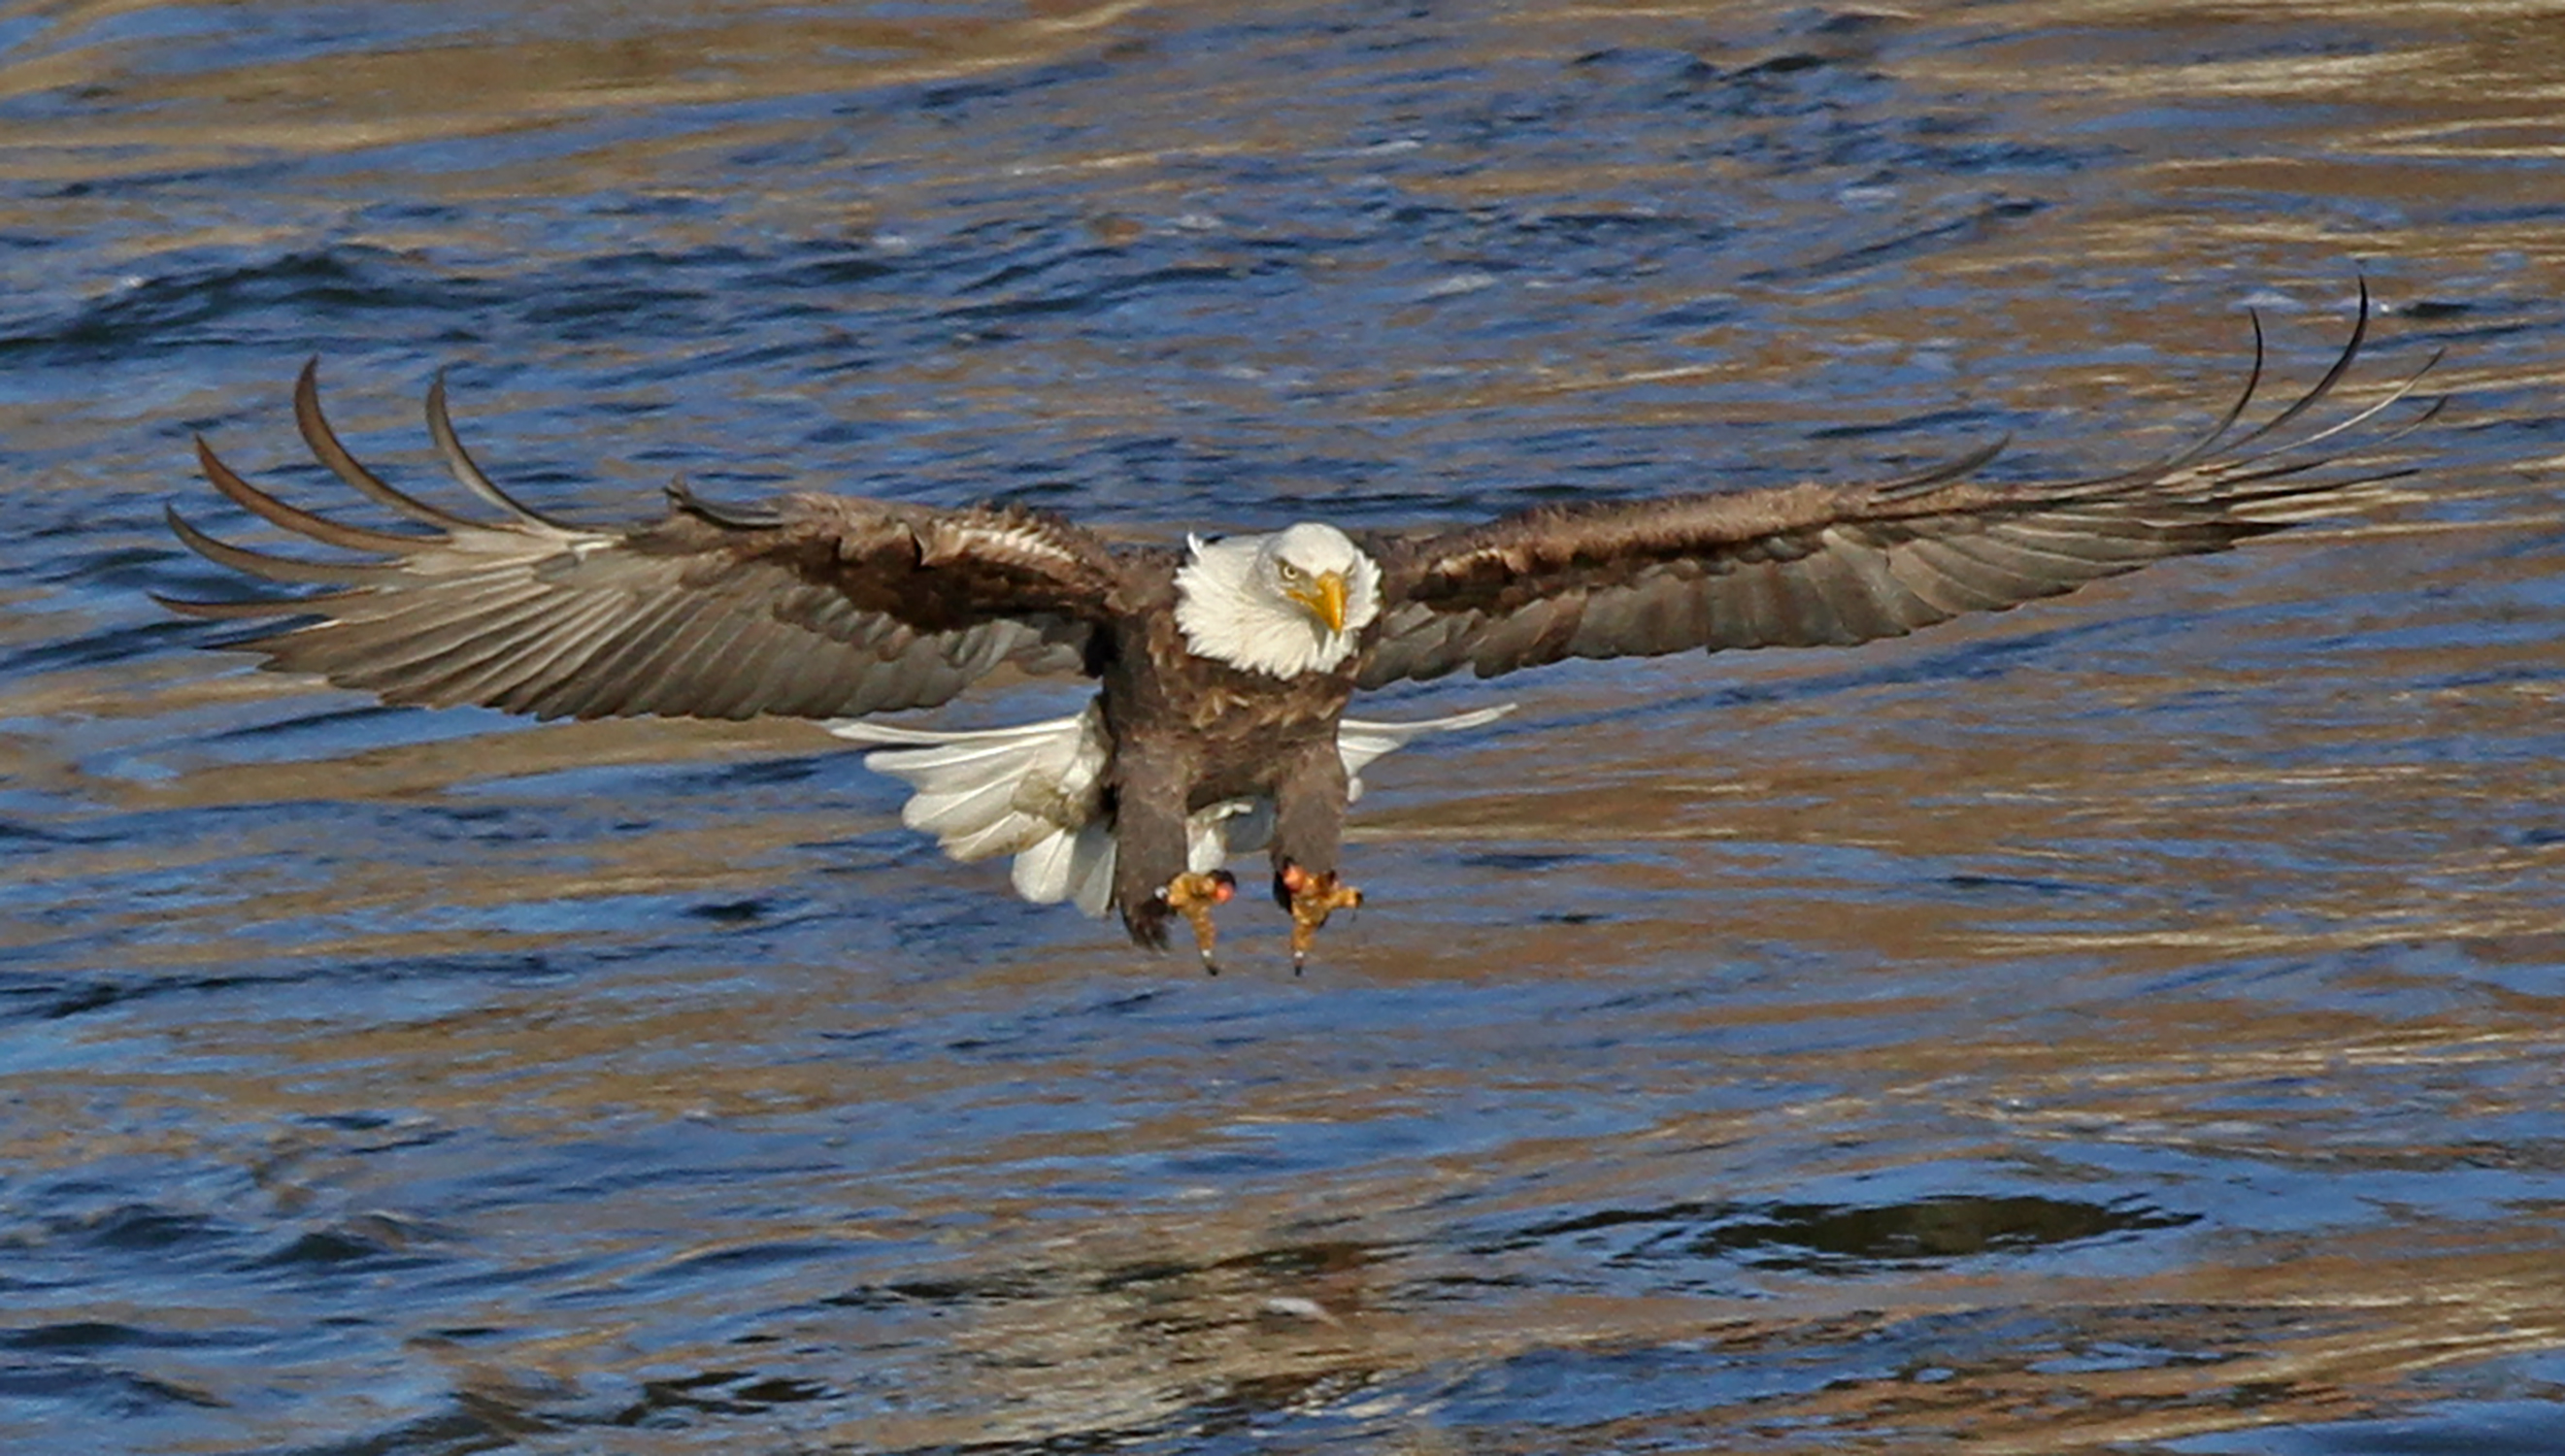 A bald eagle flies over a body of water, its feet outstretched to catch a fish.